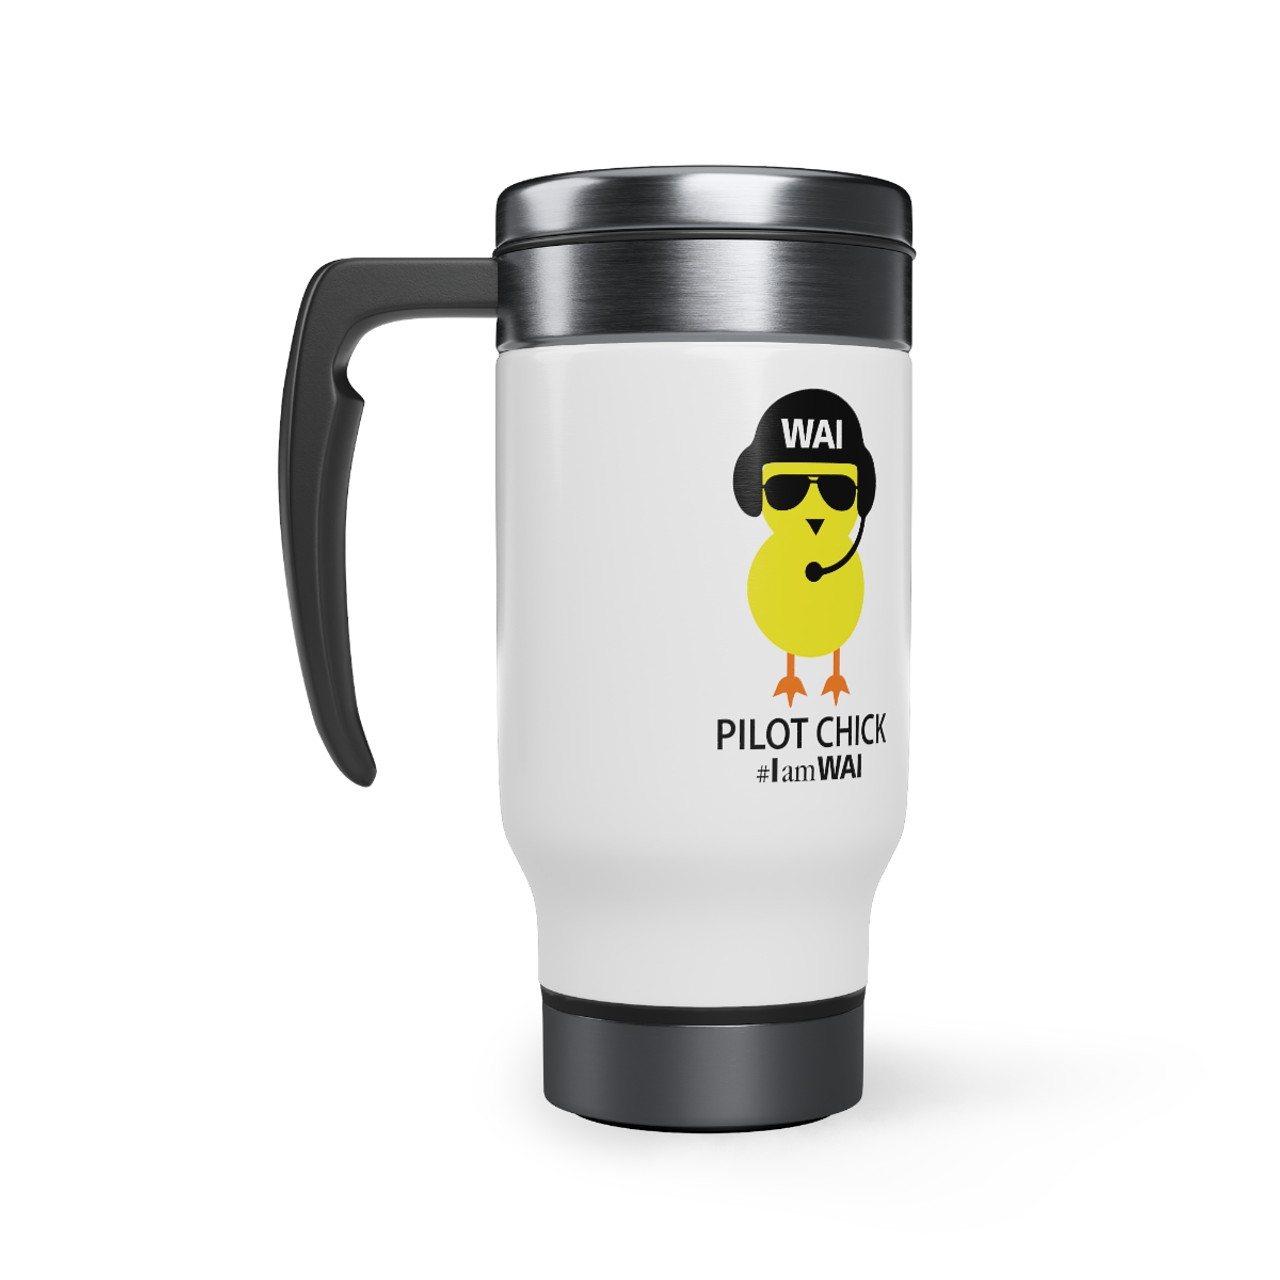 https://cdn11.bigcommerce.com/s-sqlllpksfp/images/stencil/1280x1280/products/188/691/14oz-pilot-chick-stainless-steel-travel-mug-with-handle__44984.1671047546.jpg?c=1?imbypass=on